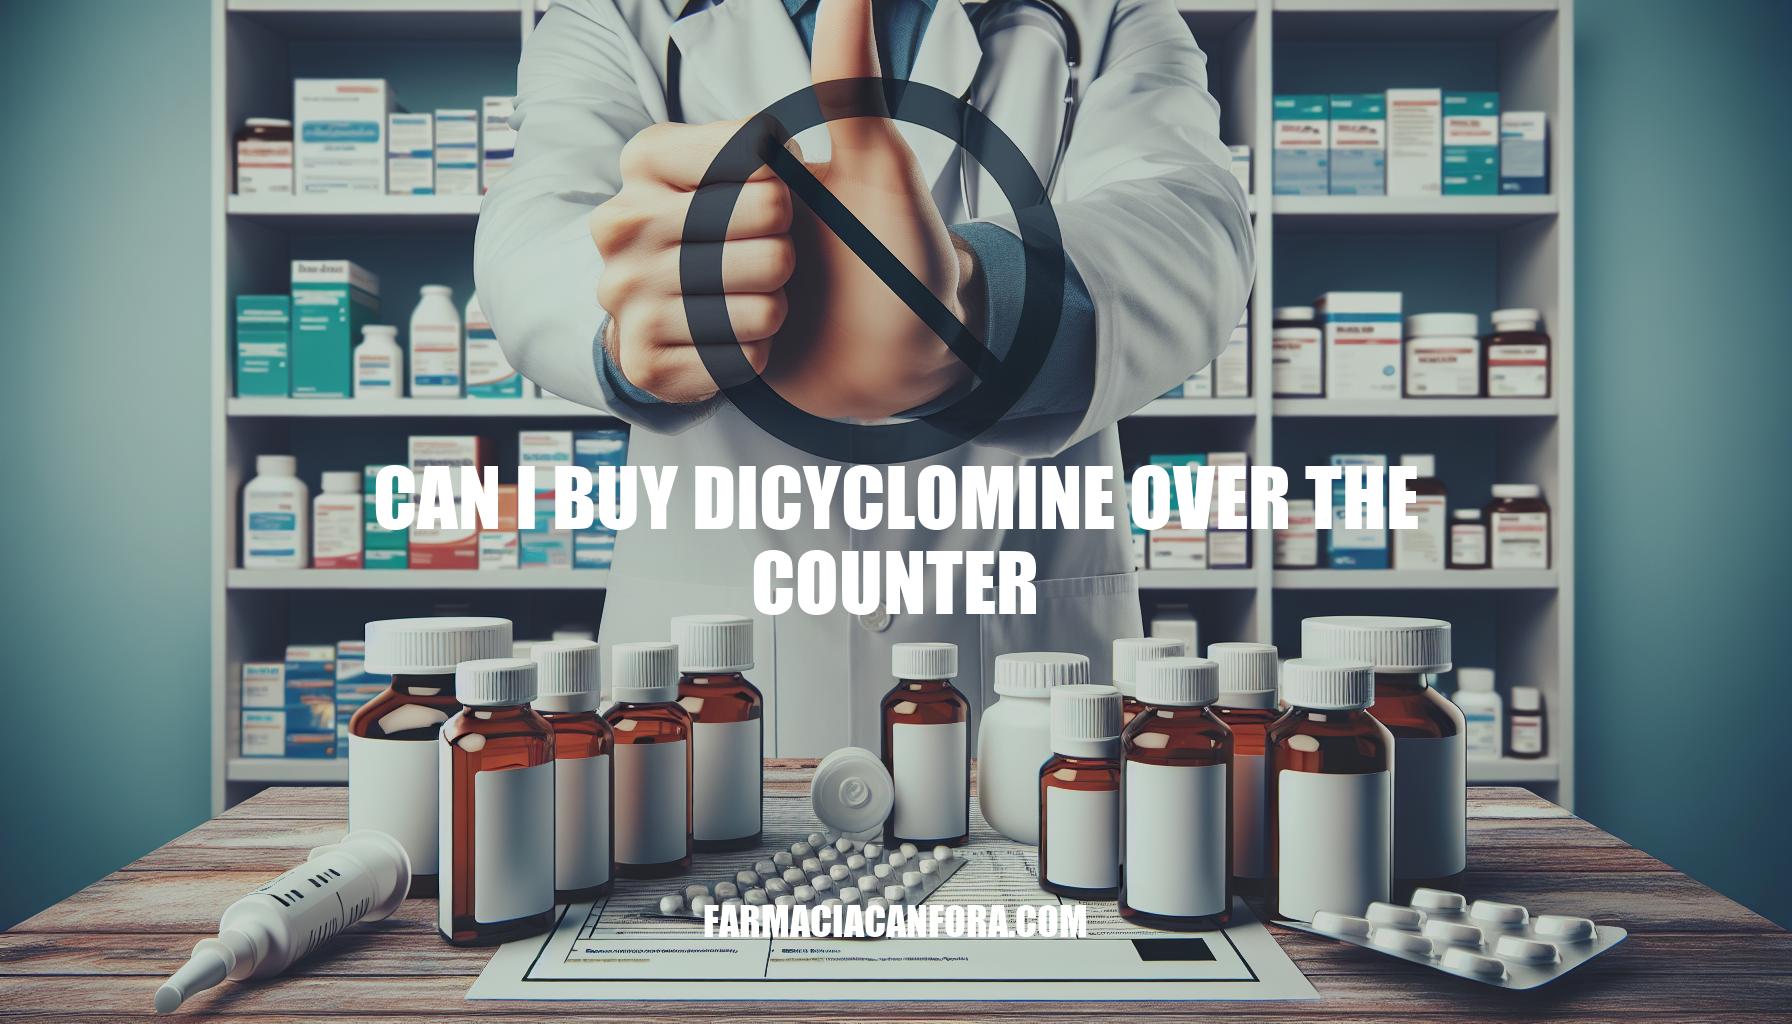 Can I Buy Dicyclomine Over the Counter?